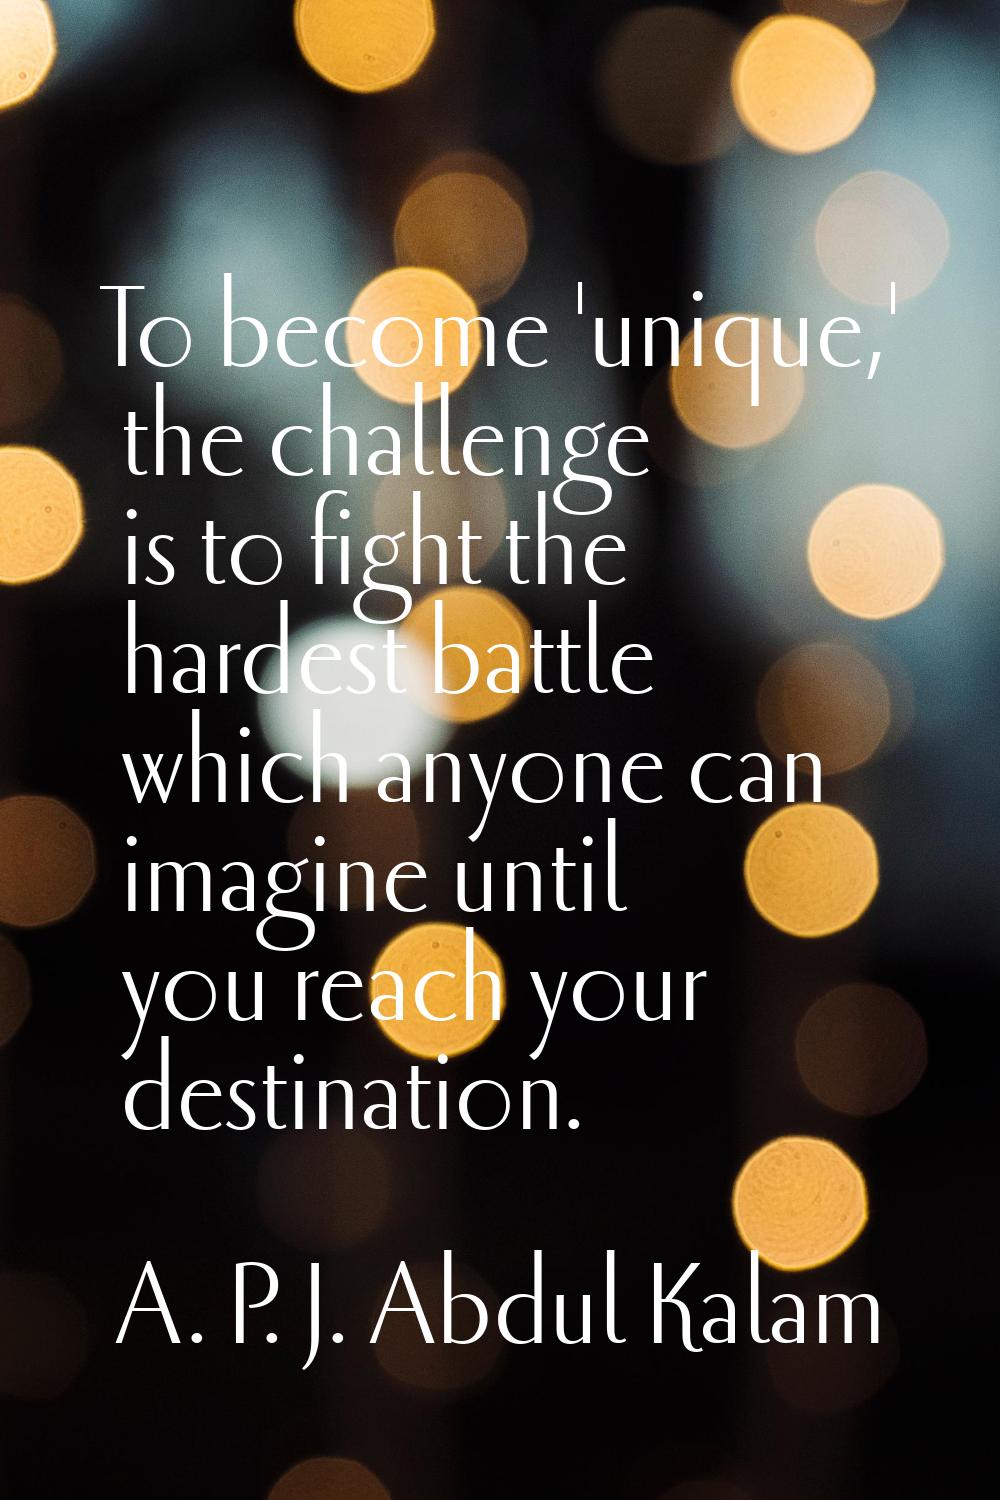 To become 'unique,' the challenge is to fight the hardest battle which anyone can imagine until you